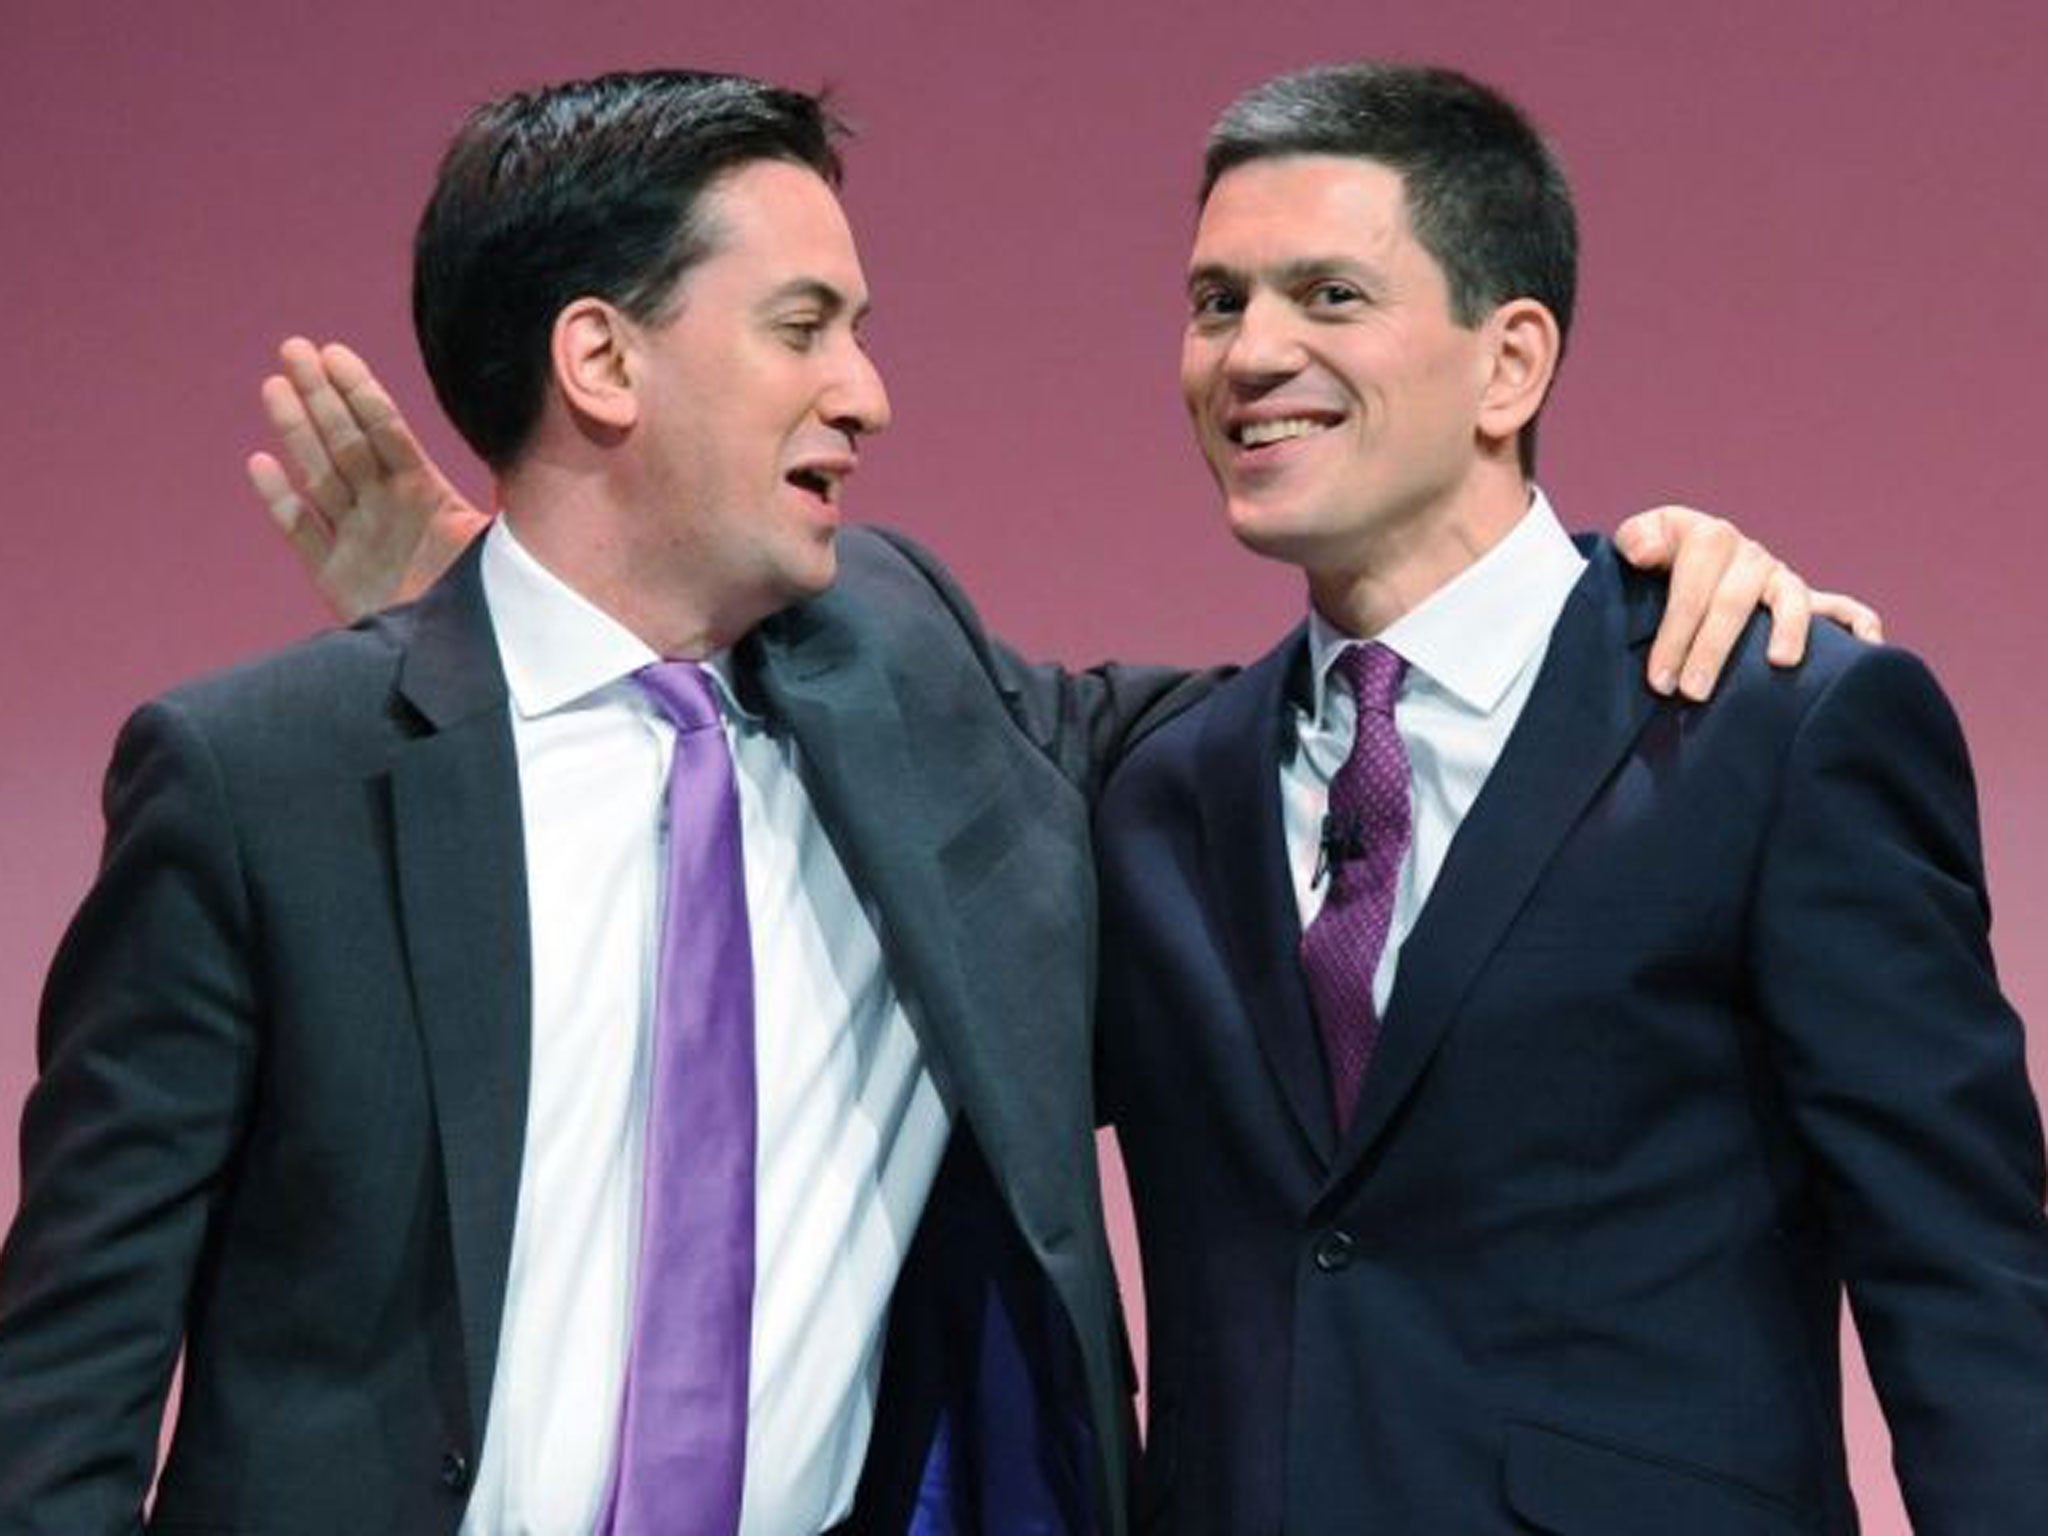 David Miliband has said his relationship with brother Ed is “healing”, as he issued a rallying cry to Labour that “it is all to play for” at the next general election.